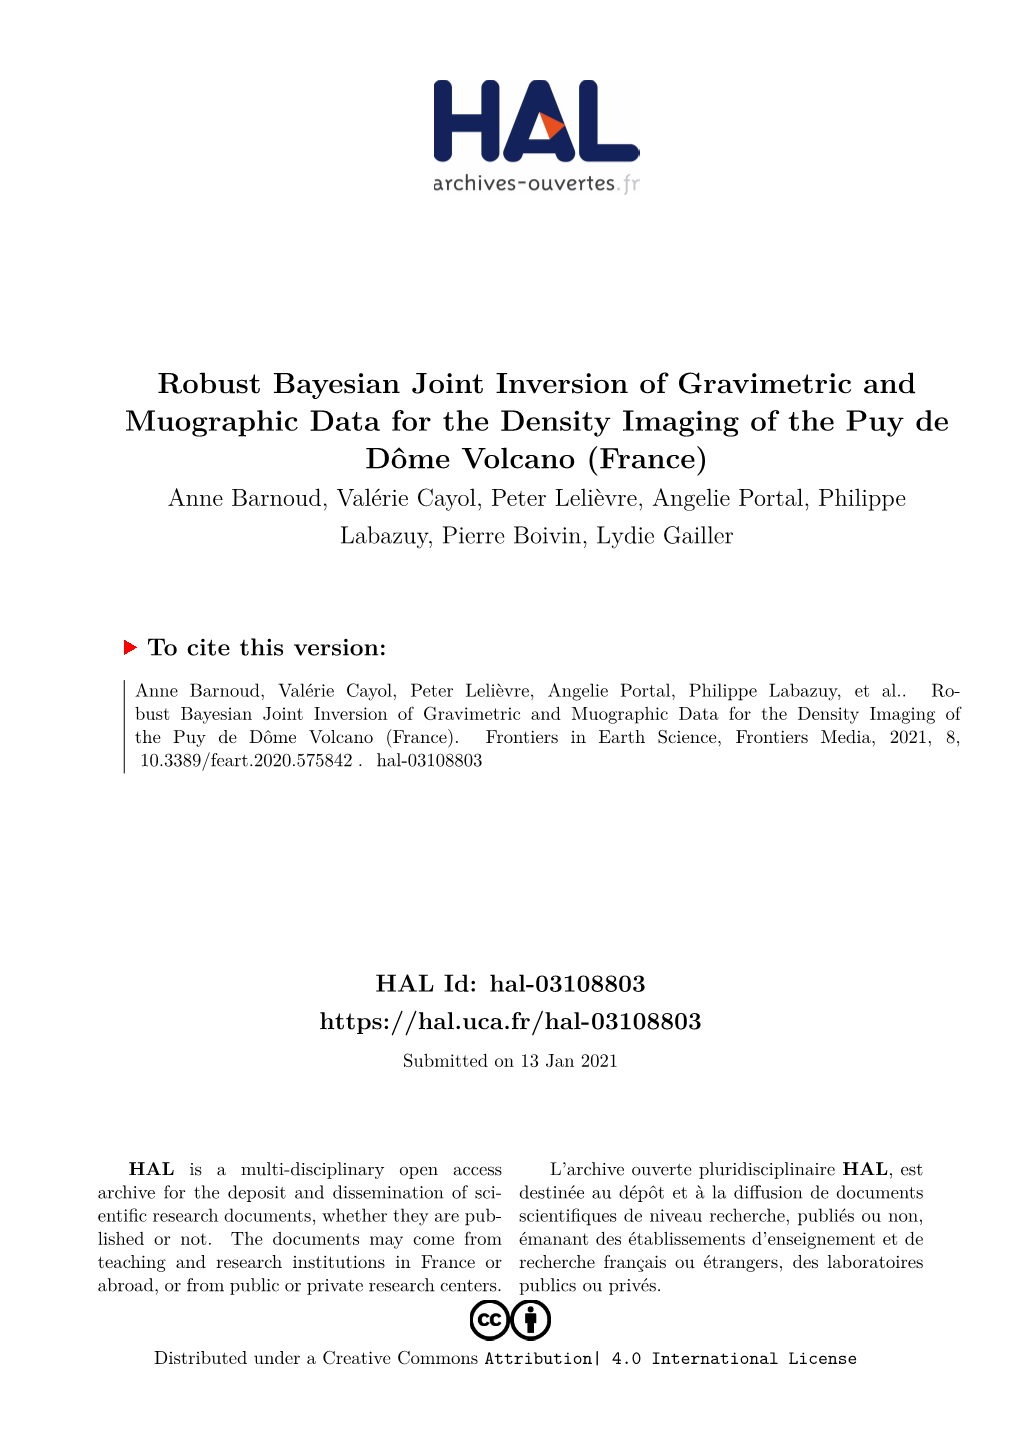 Robust Bayesian Joint Inversion of Gravimetric and Muographic Data